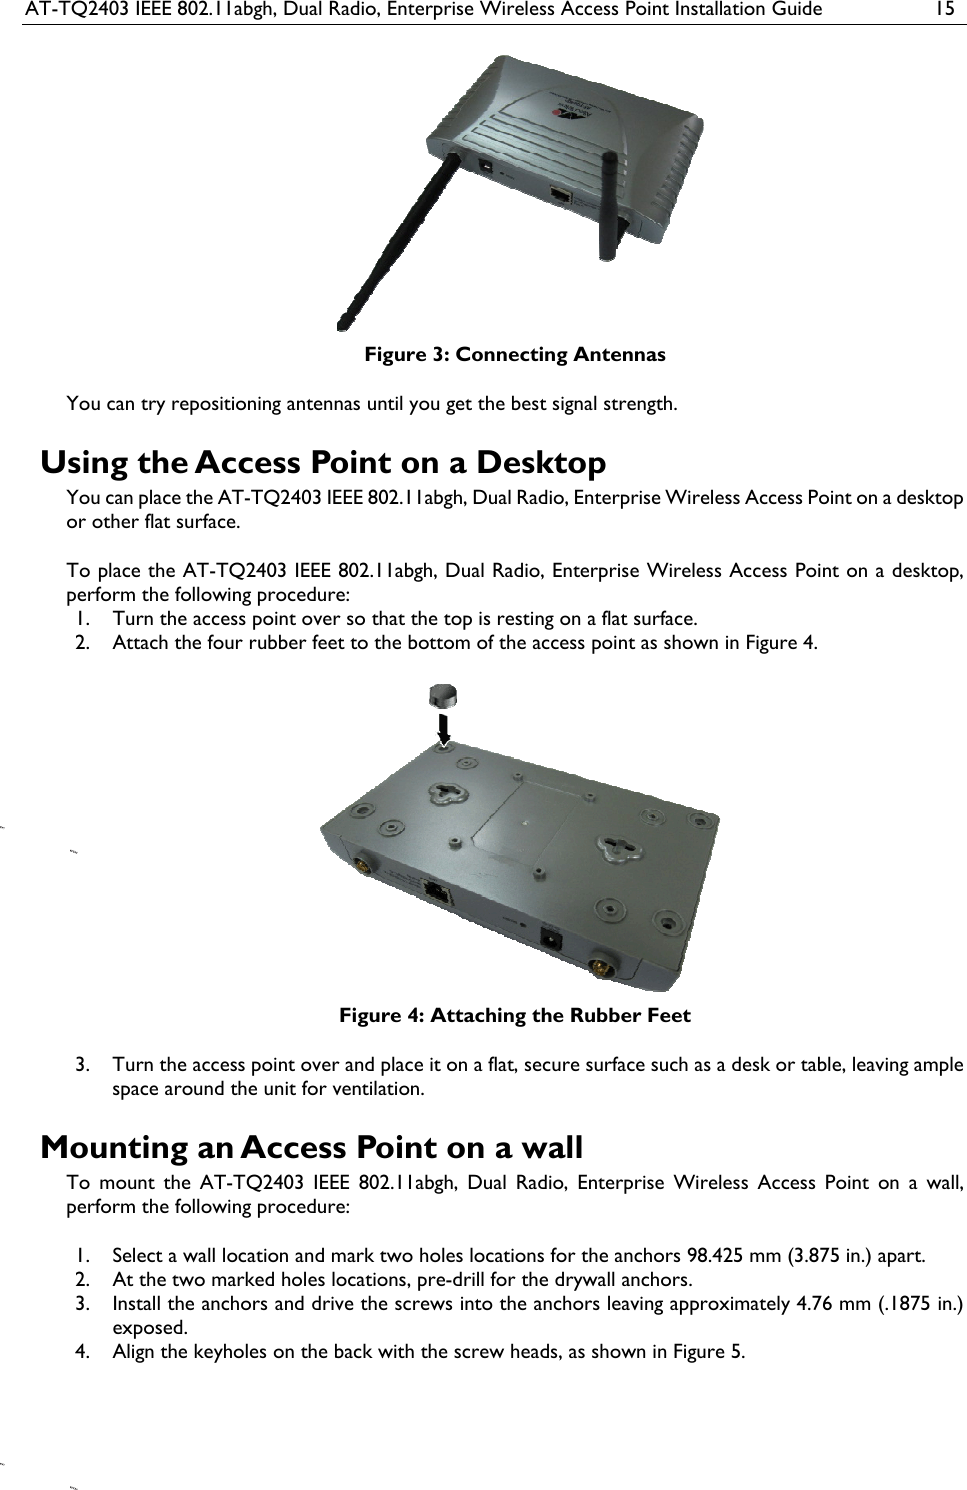 AT-TQ2403 IEEE 802.11abgh, Dual Radio, Enterprise Wireless Access Point Installation Guide  15  Figure 3: Connecting Antennas You can try repositioning antennas until you get the best signal strength. Using the Access Point on a Desktop You can place the AT-TQ2403 IEEE 802.11abgh, Dual Radio, Enterprise Wireless Access Point on a desktop or other flat surface.  To place the AT-TQ2403 IEEE 802.11abgh, Dual Radio, Enterprise Wireless Access Point on a desktop, perform the following procedure: 1. Turn the access point over so that the top is resting on a flat surface. 2. Attach the four rubber feet to the bottom of the access point as shown in Figure 4.  Figure 4: Attaching the Rubber Feet 3. Turn the access point over and place it on a flat, secure surface such as a desk or table, leaving ample space around the unit for ventilation. Mounting an Access Point on a wall To mount the AT-TQ2403 IEEE 802.11abgh, Dual Radio, Enterprise Wireless Access Point on a wall, perform the following procedure:  1. Select a wall location and mark two holes locations for the anchors 98.425 mm (3.875 in.) apart. 2. At the two marked holes locations, pre-drill for the drywall anchors. 3. Install the anchors and drive the screws into the anchors leaving approximately 4.76 mm (.1875 in.) exposed. 4. Align the keyholes on the back with the screw heads, as shown in Figure 5. 